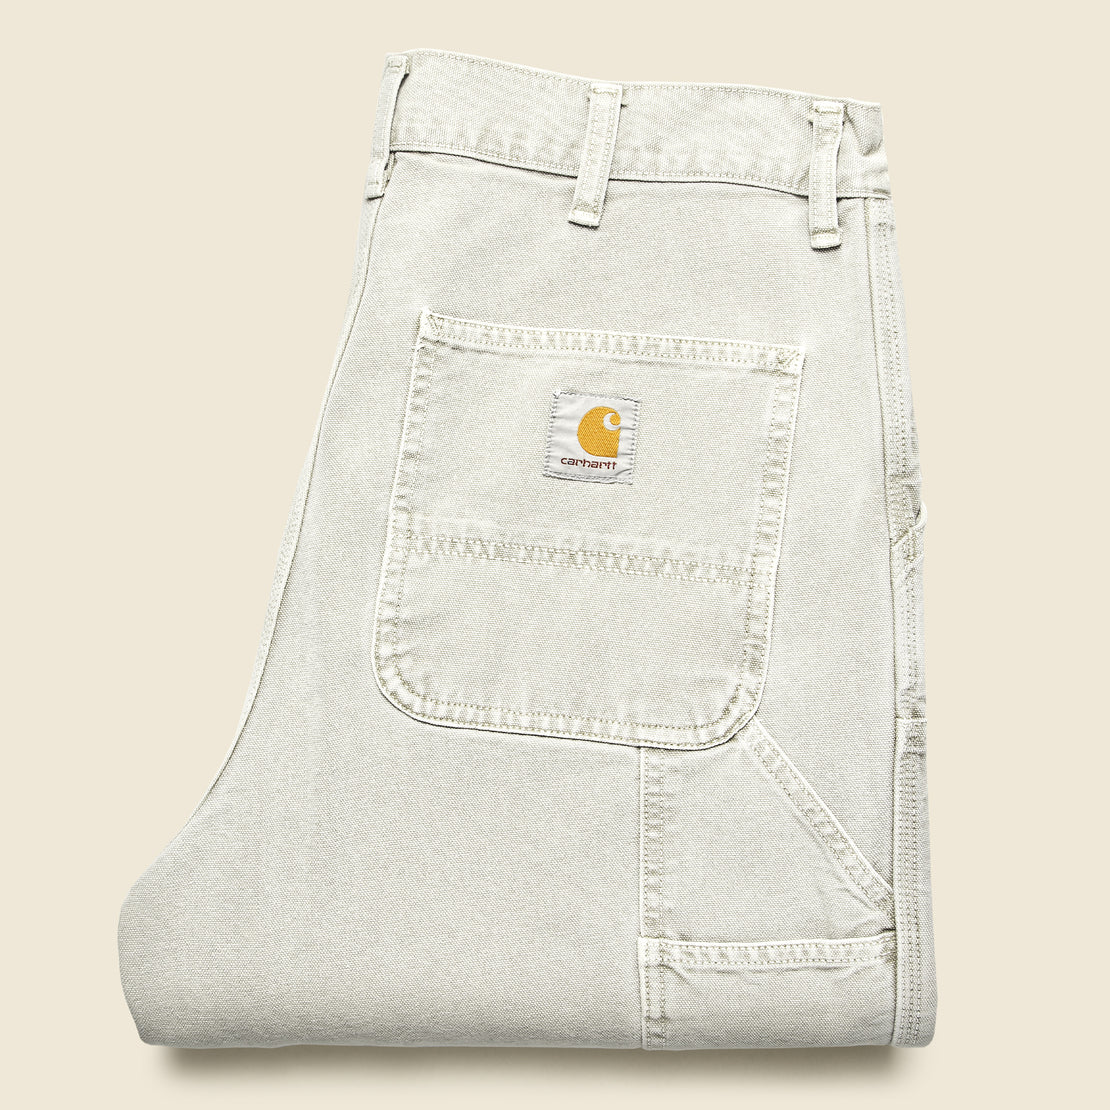 Double Knee Pants - Salt - Carhartt WIP - STAG Provisions - Pants - Twill